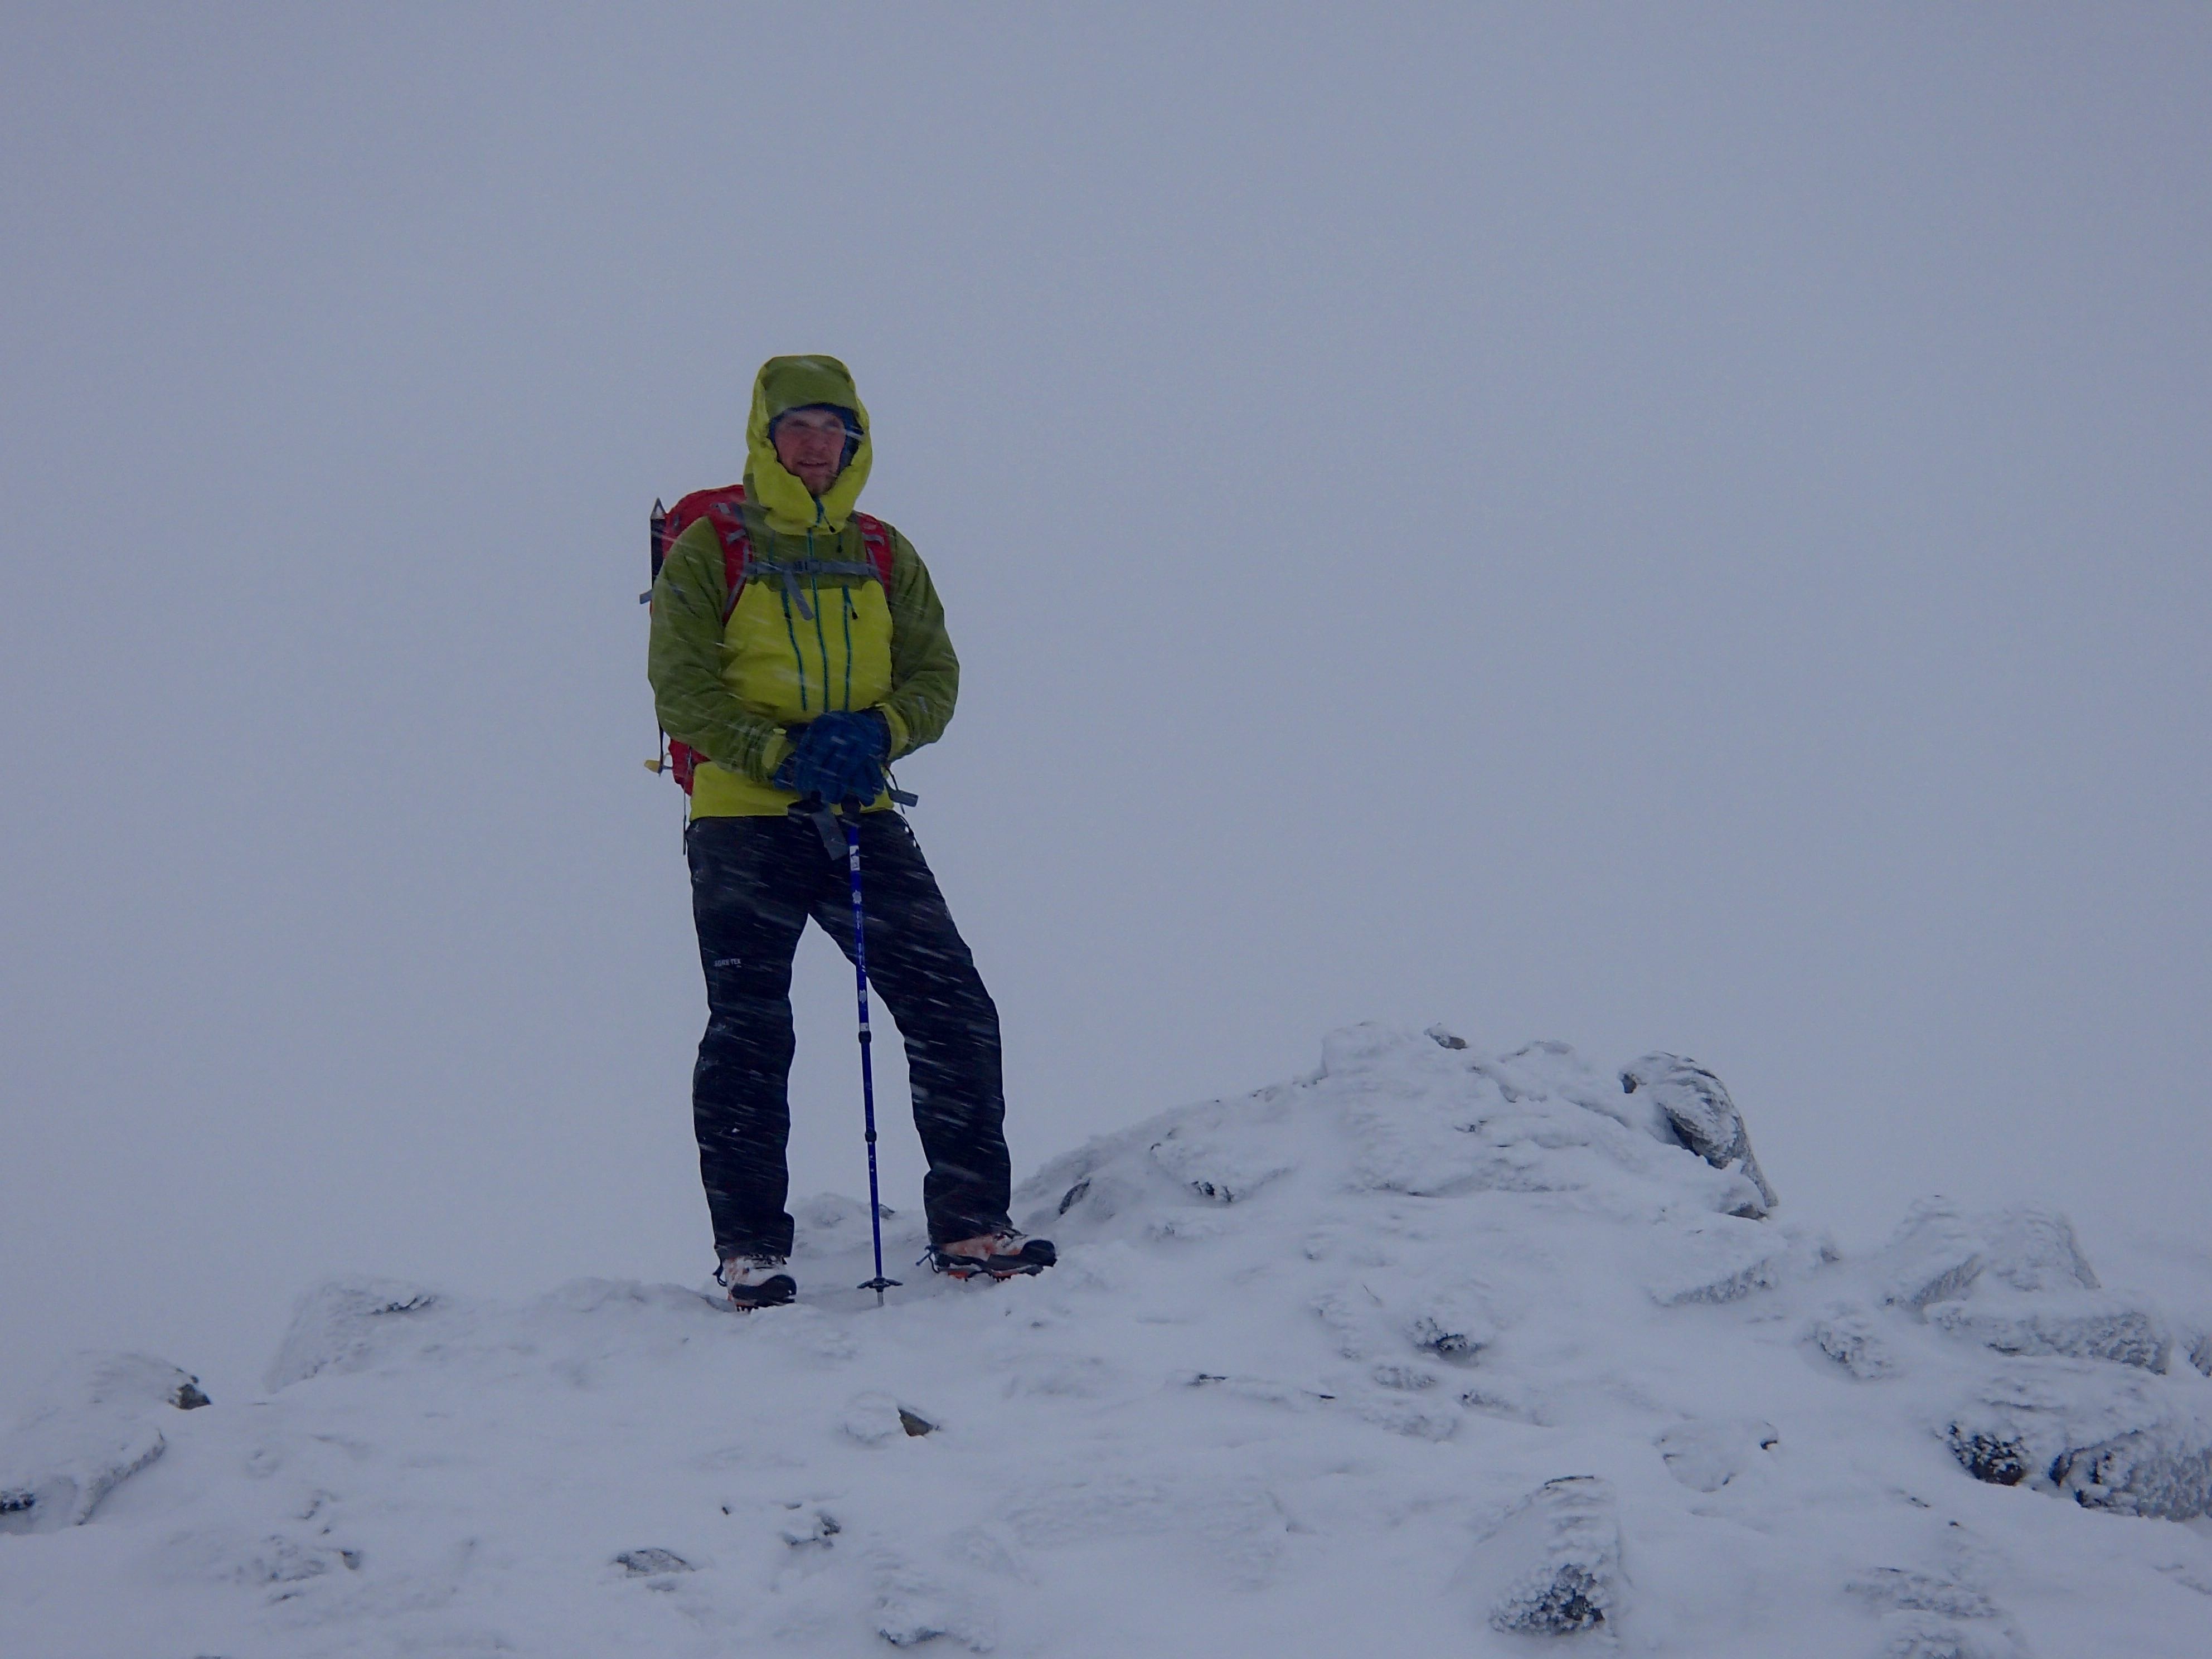 Mark from Goretex on the Summit of Meall a Bhuiridh